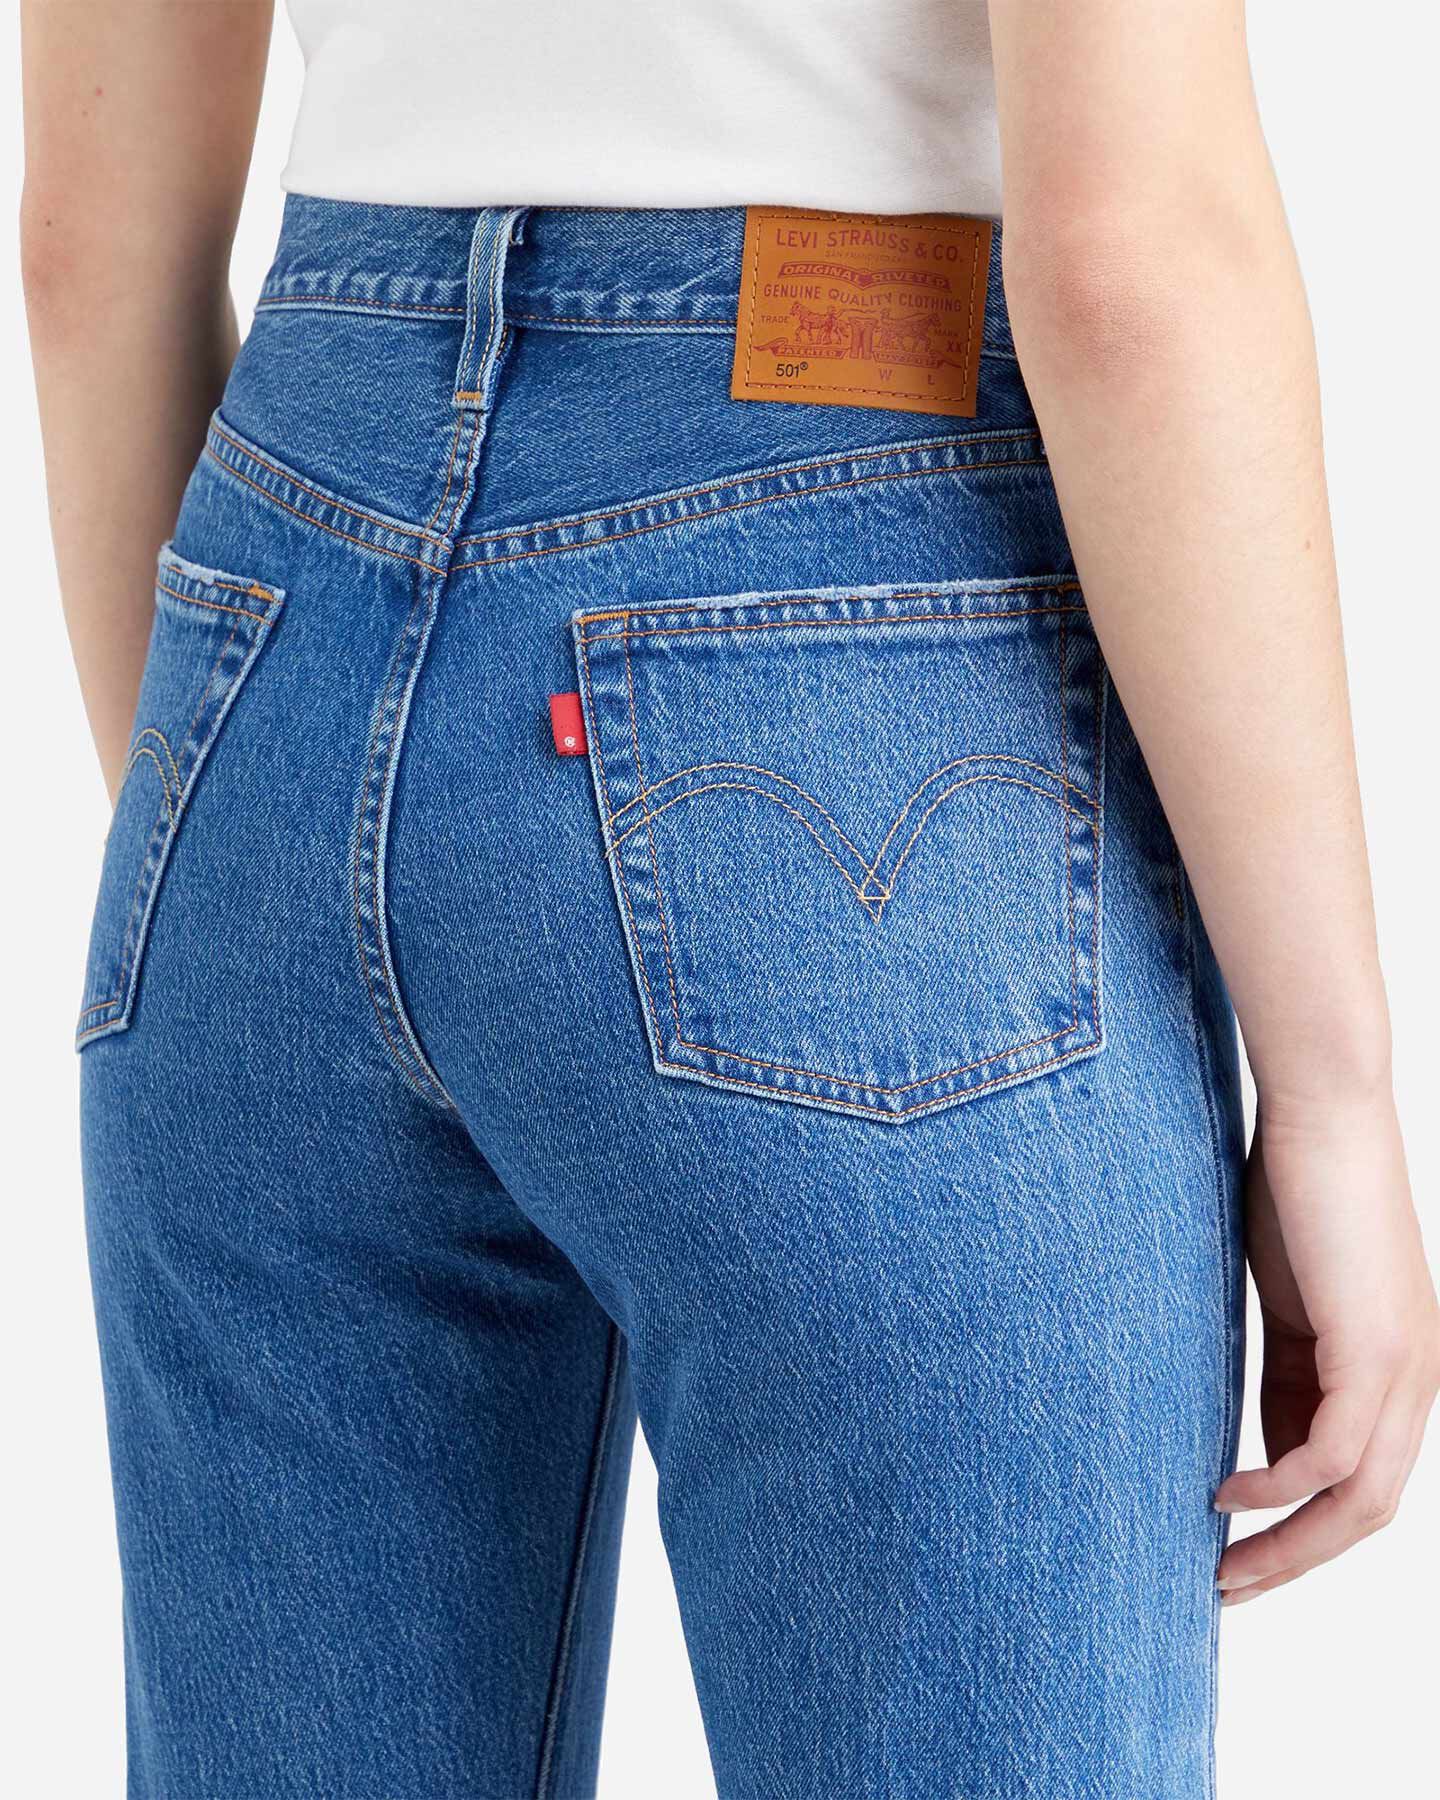  Jeans LEVI'S 501 CROP L28 W S4127913|0225|29 scatto 5